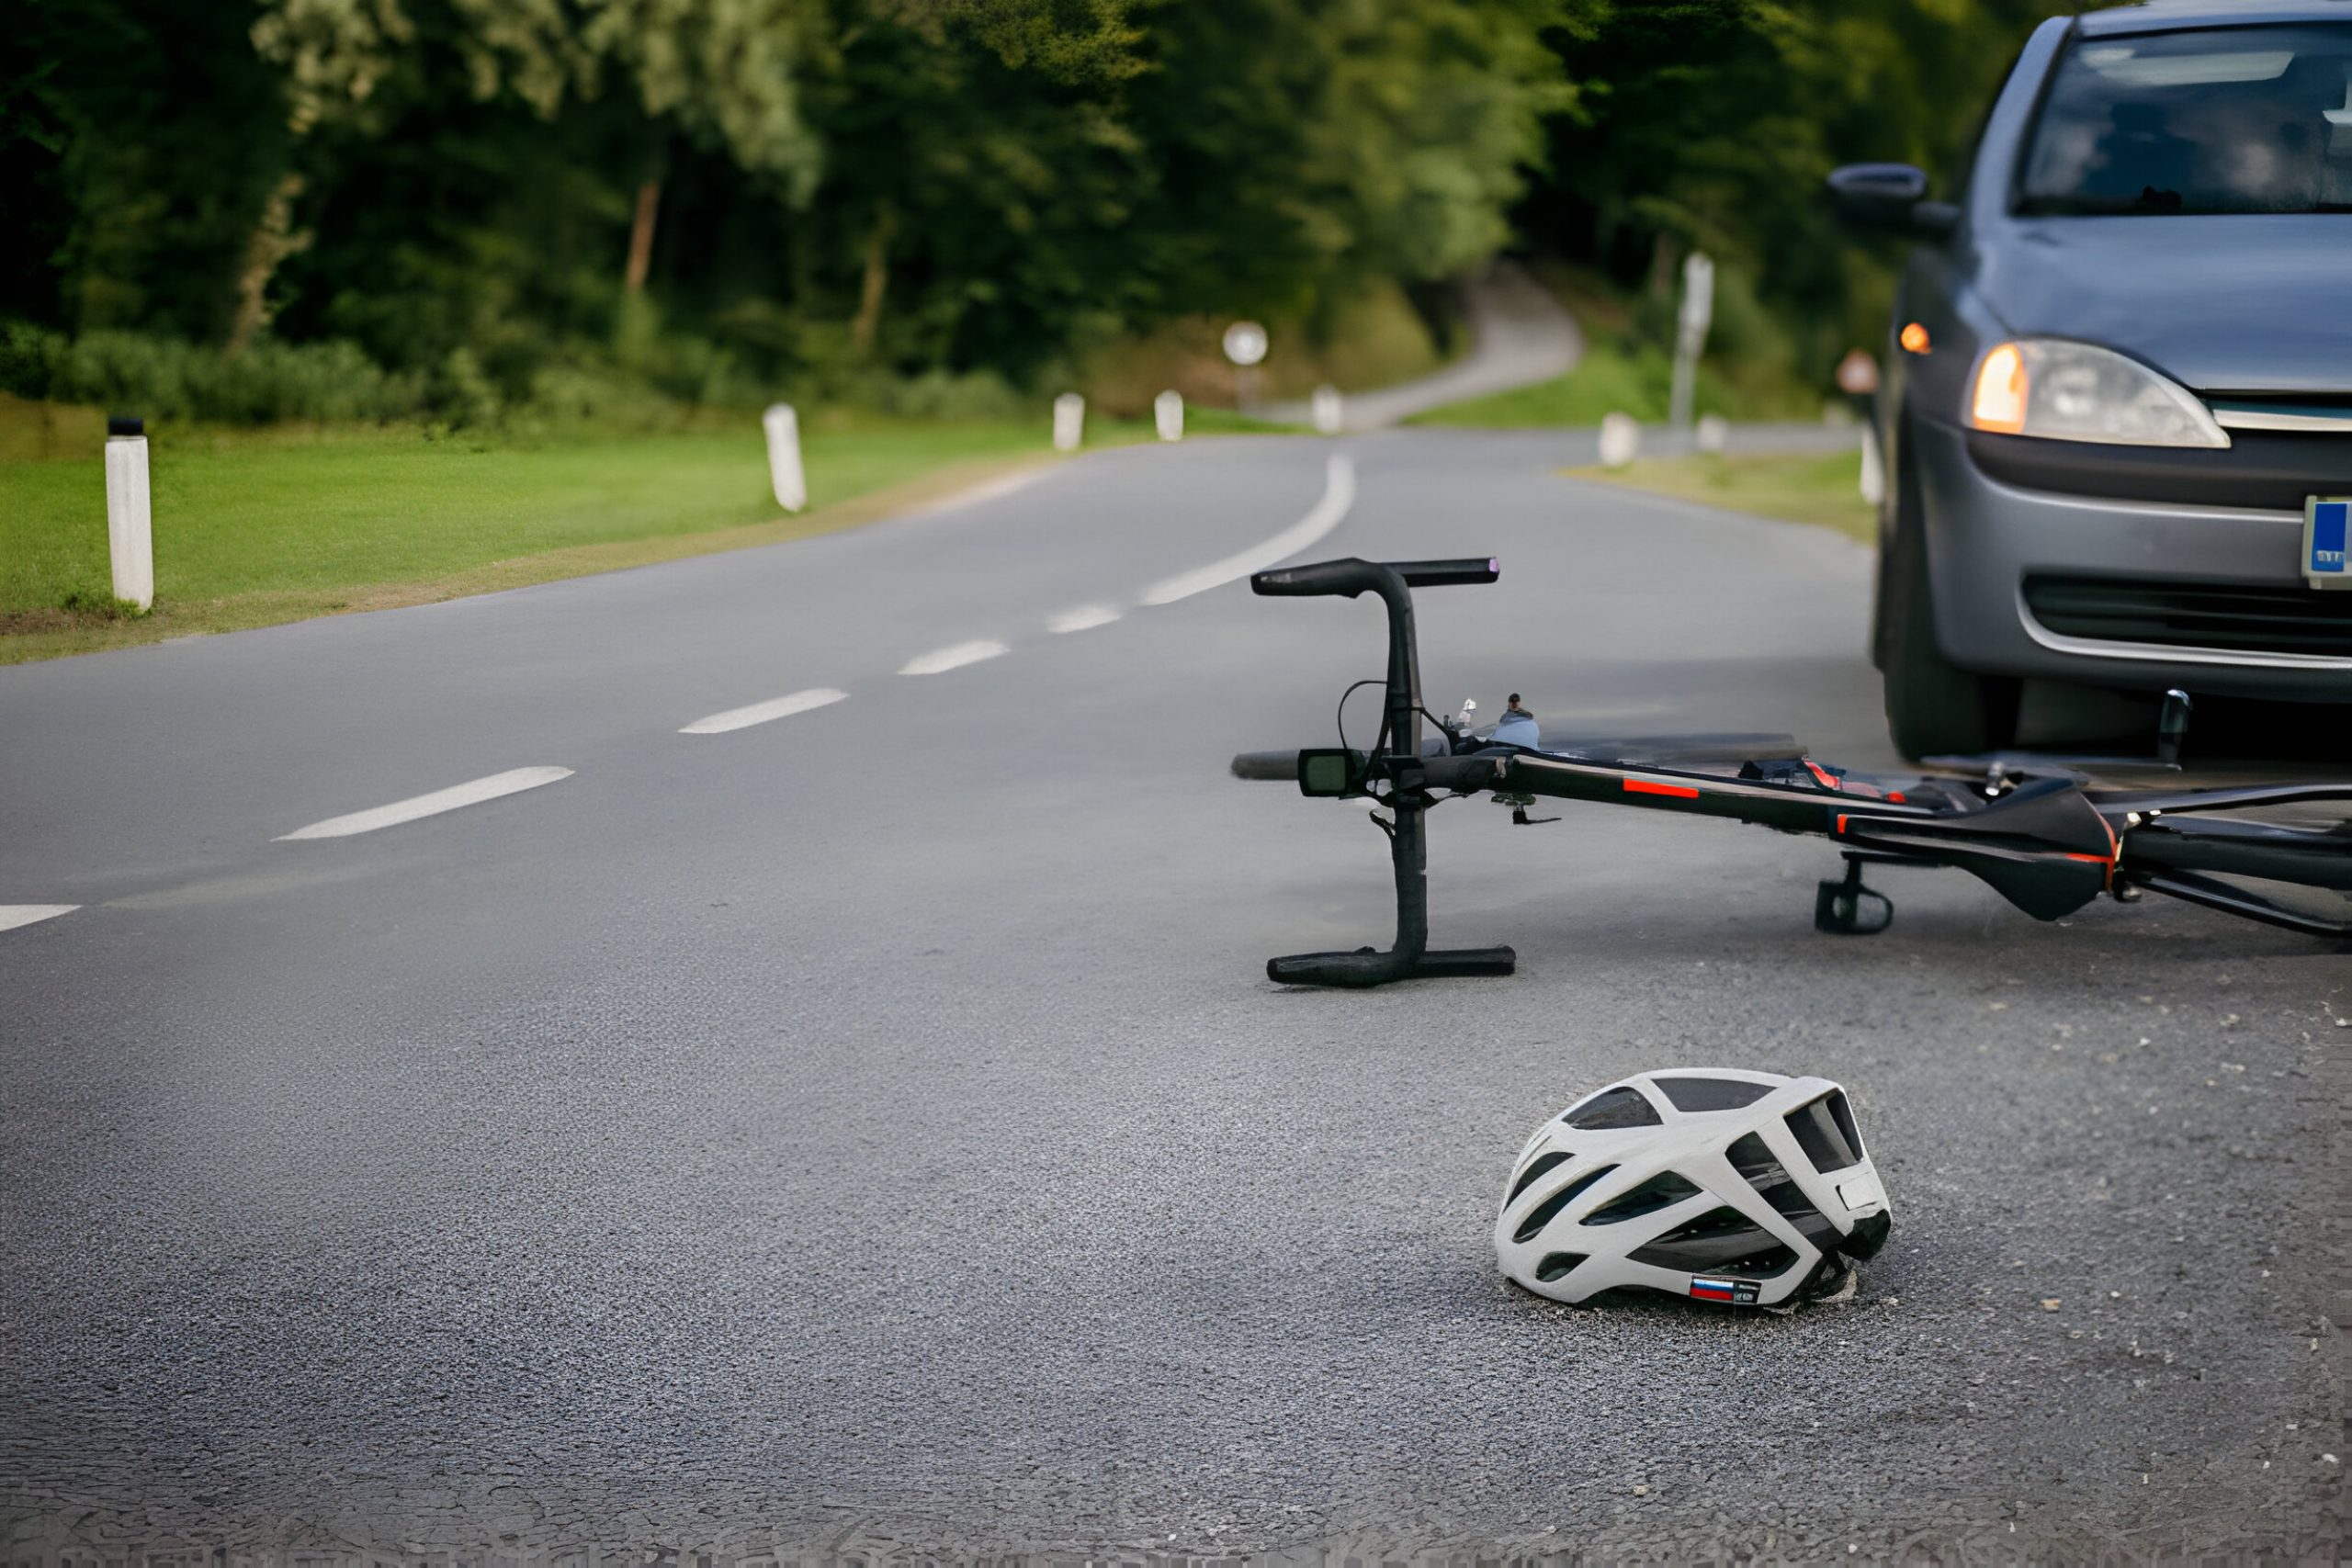 How an Attorney Can Help in a Bicycle Accident Case